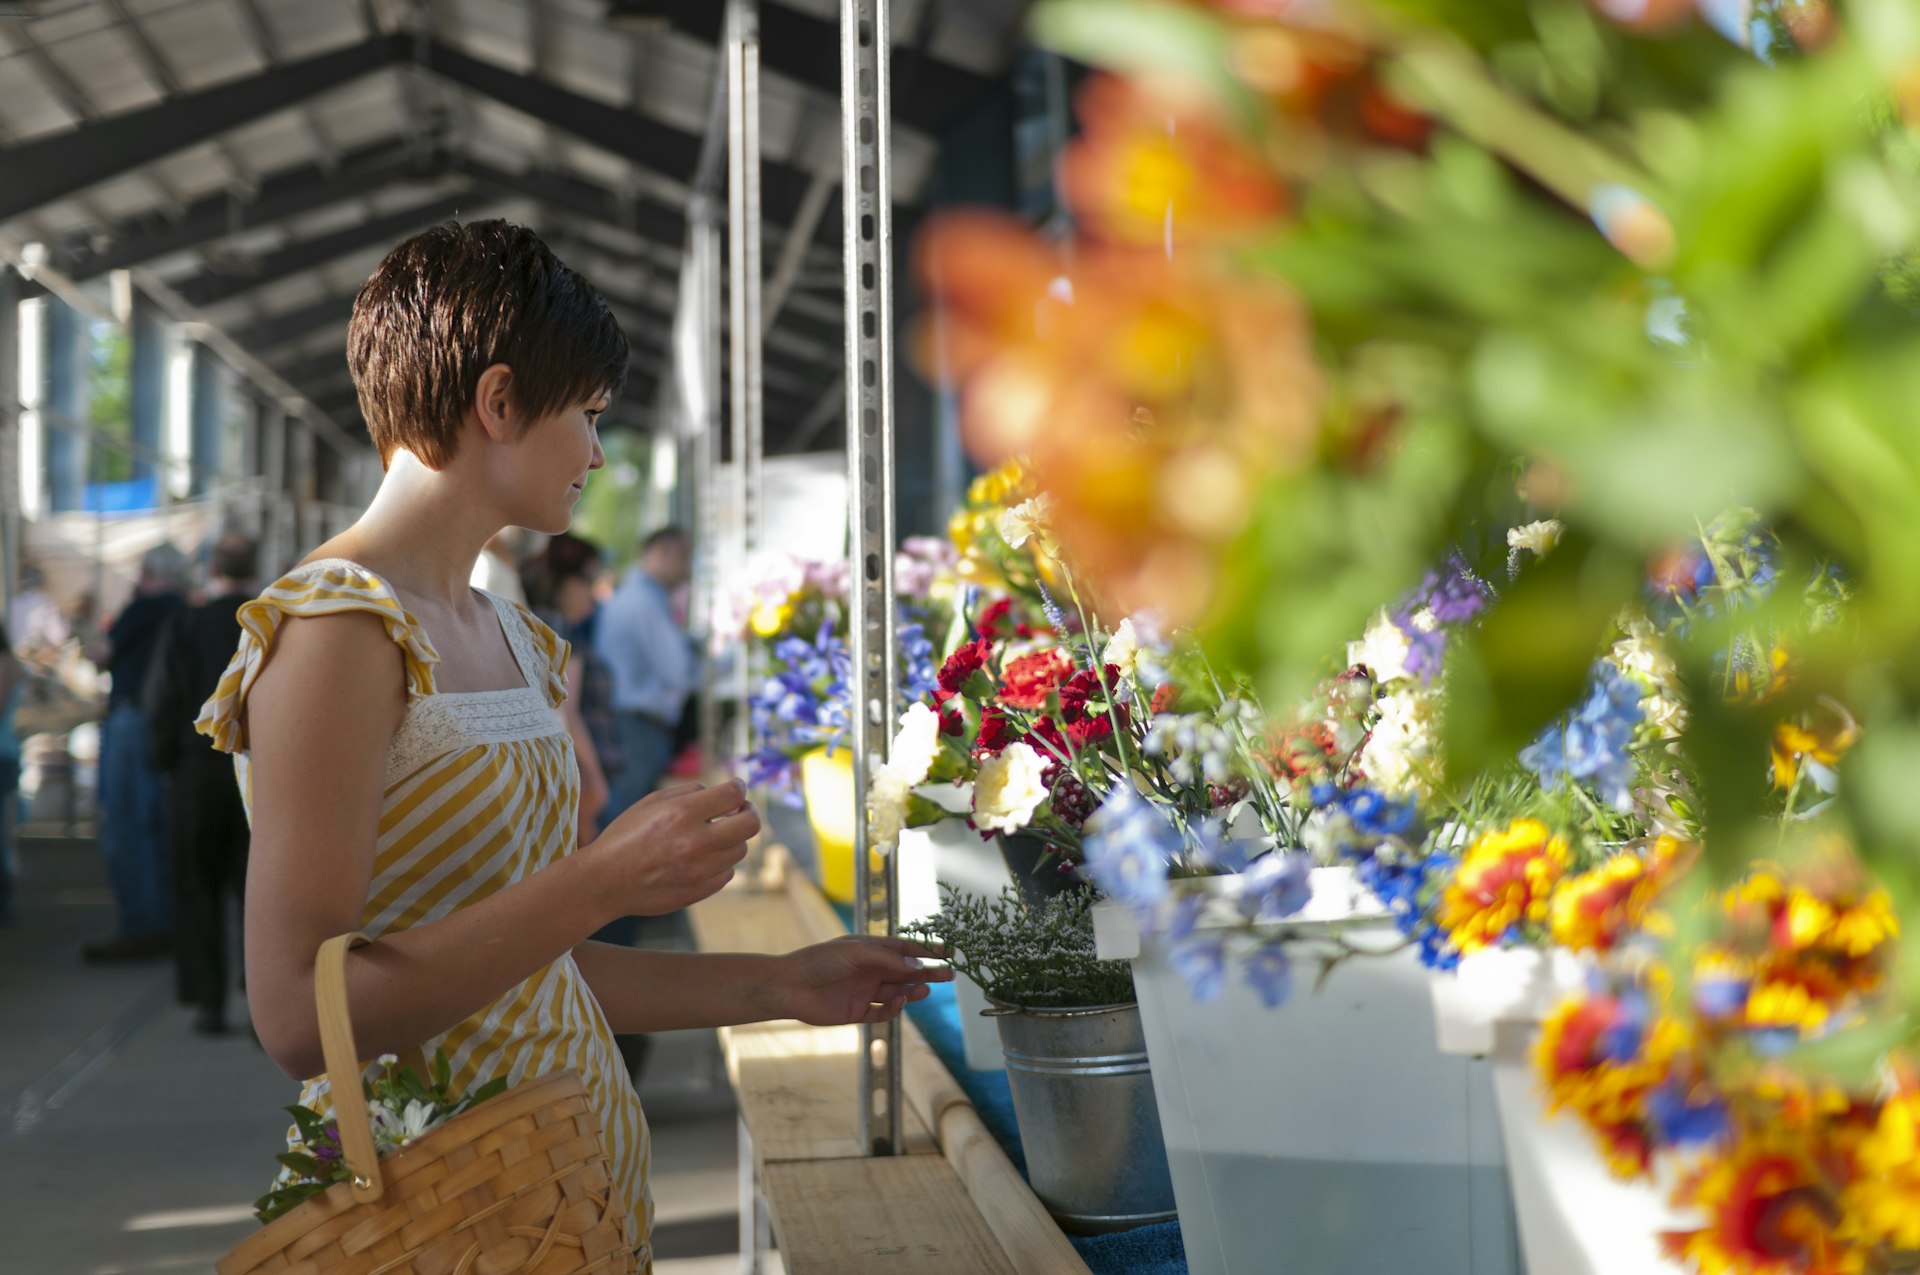 Young woman shopping for flowers at a farmers market